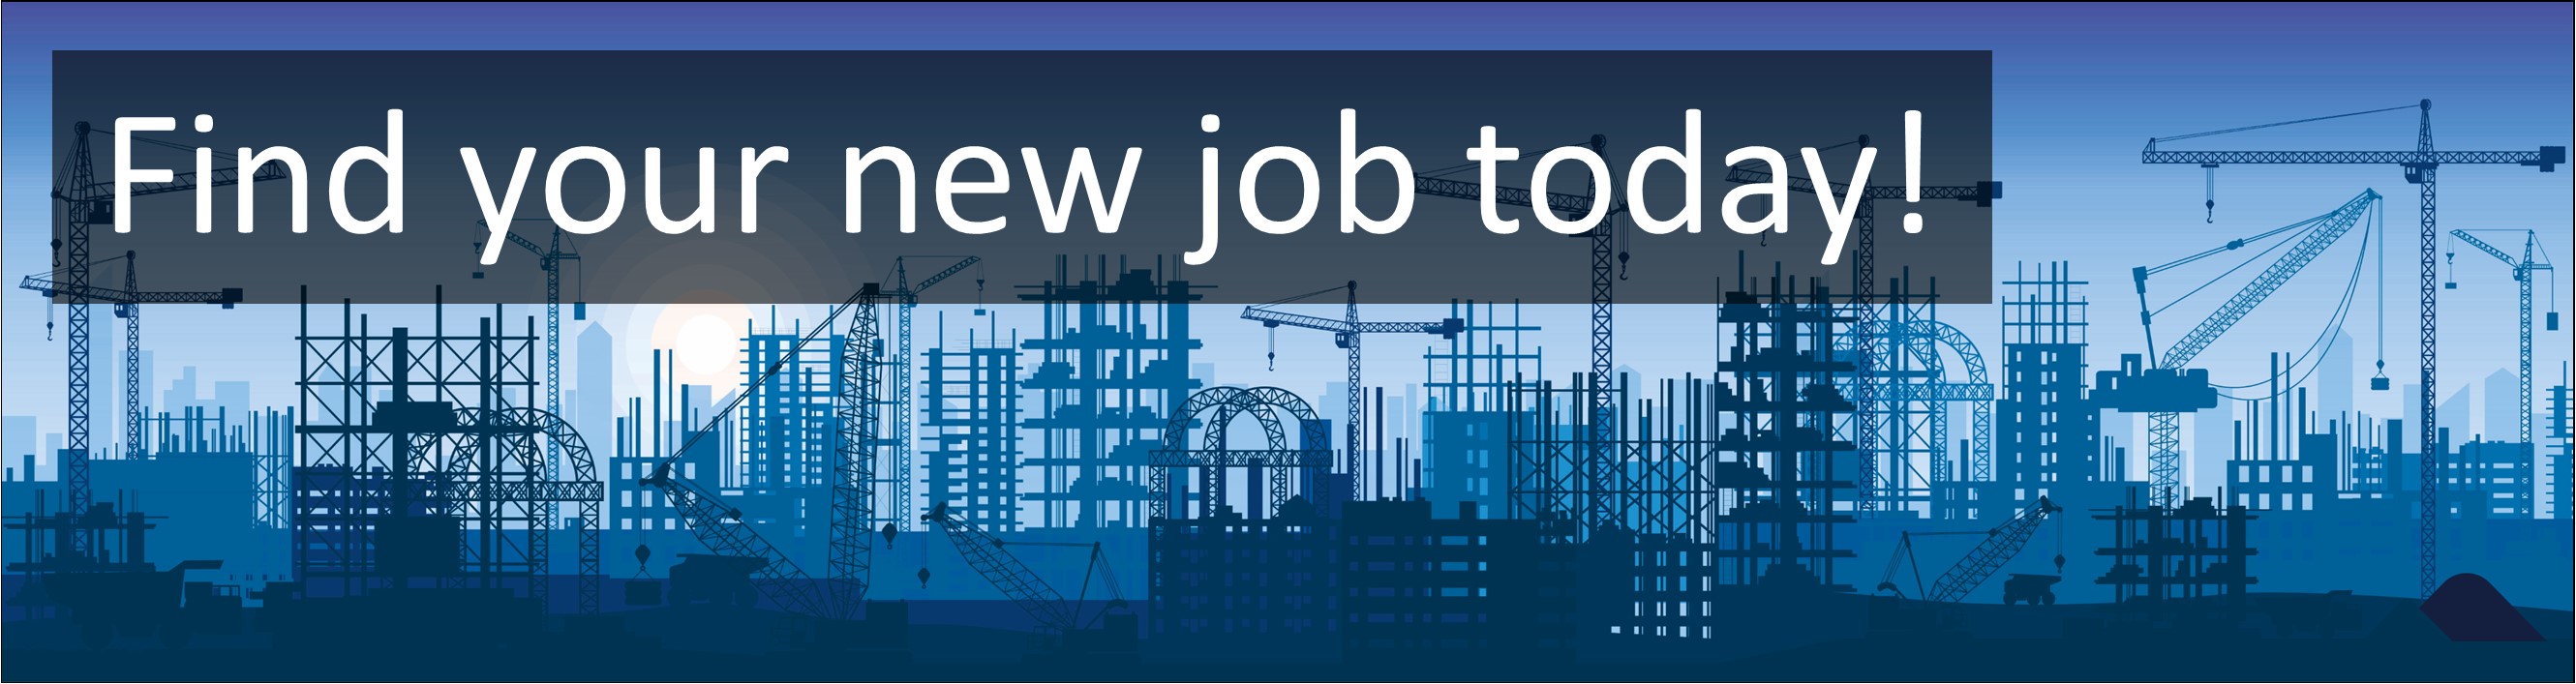 Construction & Trades Jobs. Multi-Skilled Maintenance Fitter / Electro Mechanical Engineer Jobs, Careers & Vacancies in Tilbury, Essex Advertised by AWD online – Multi-Job Board Advertising and CV Sourcing Recruitment Services